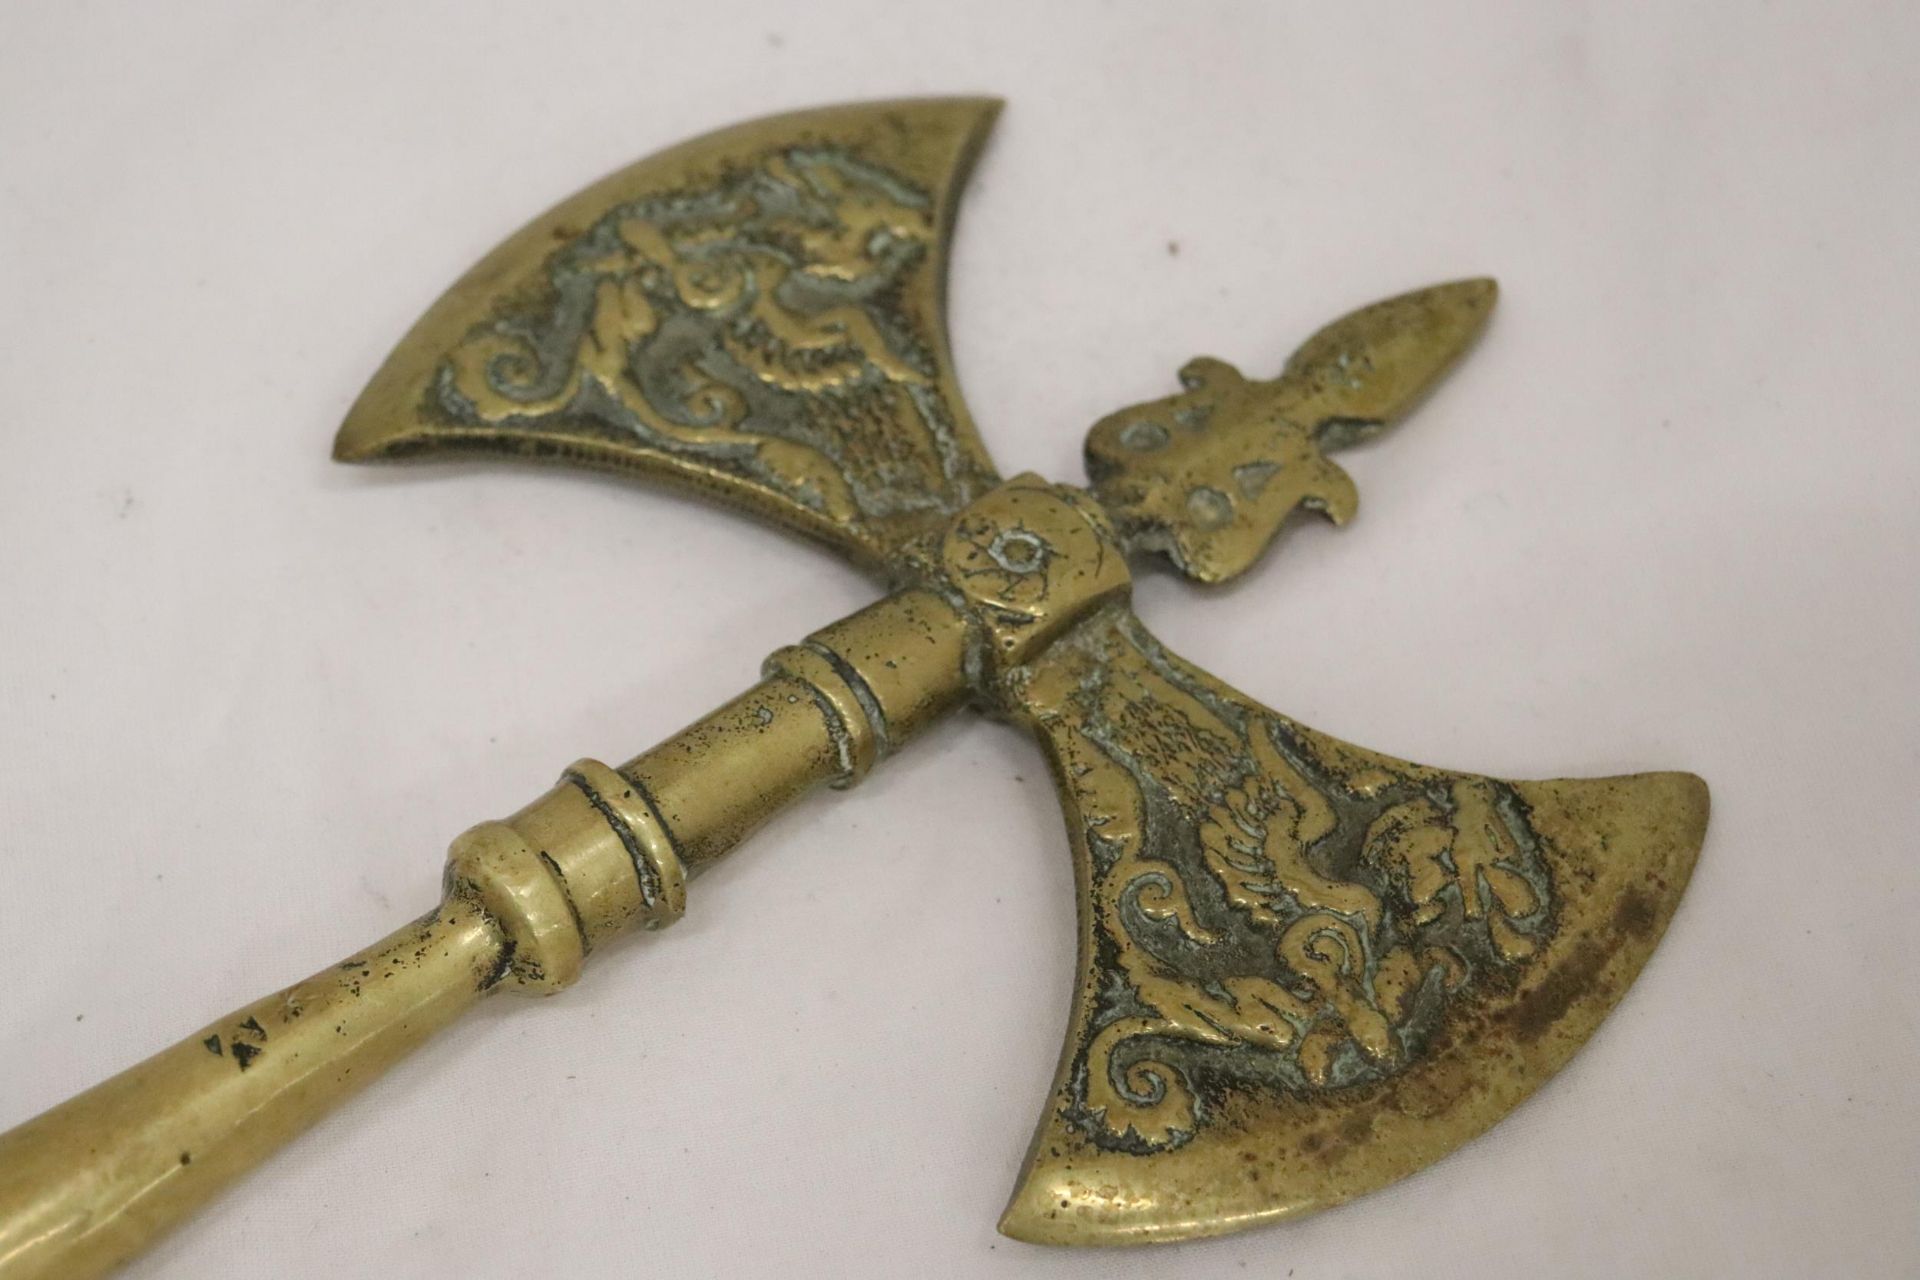 A SOLID BRASS DOUBLE SIDED BATTLE AXE - Image 2 of 5